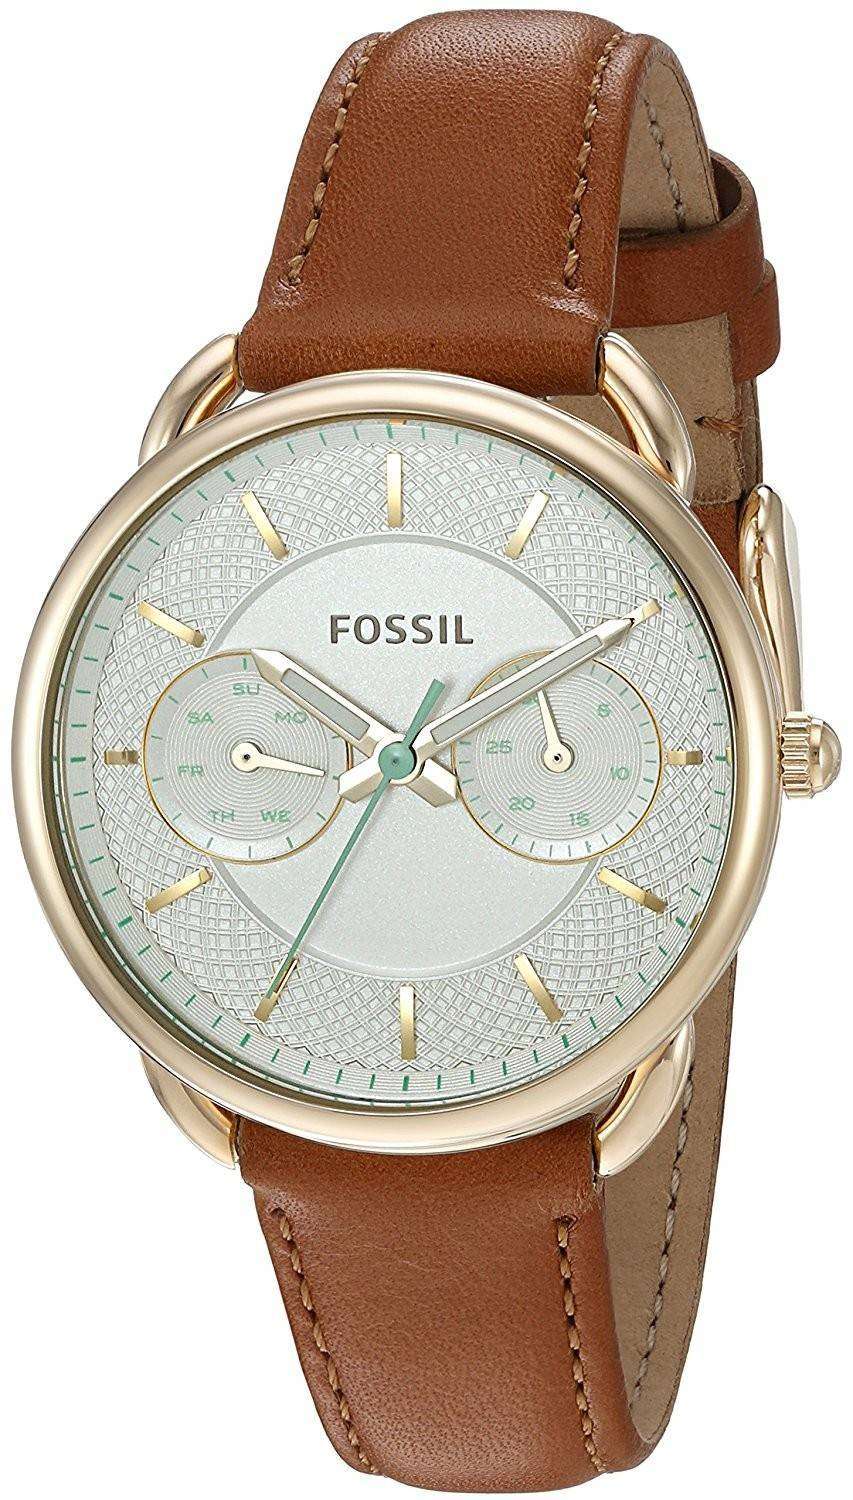 Watches: Fossil watch woman analogue leather strap model Tailor ES4421